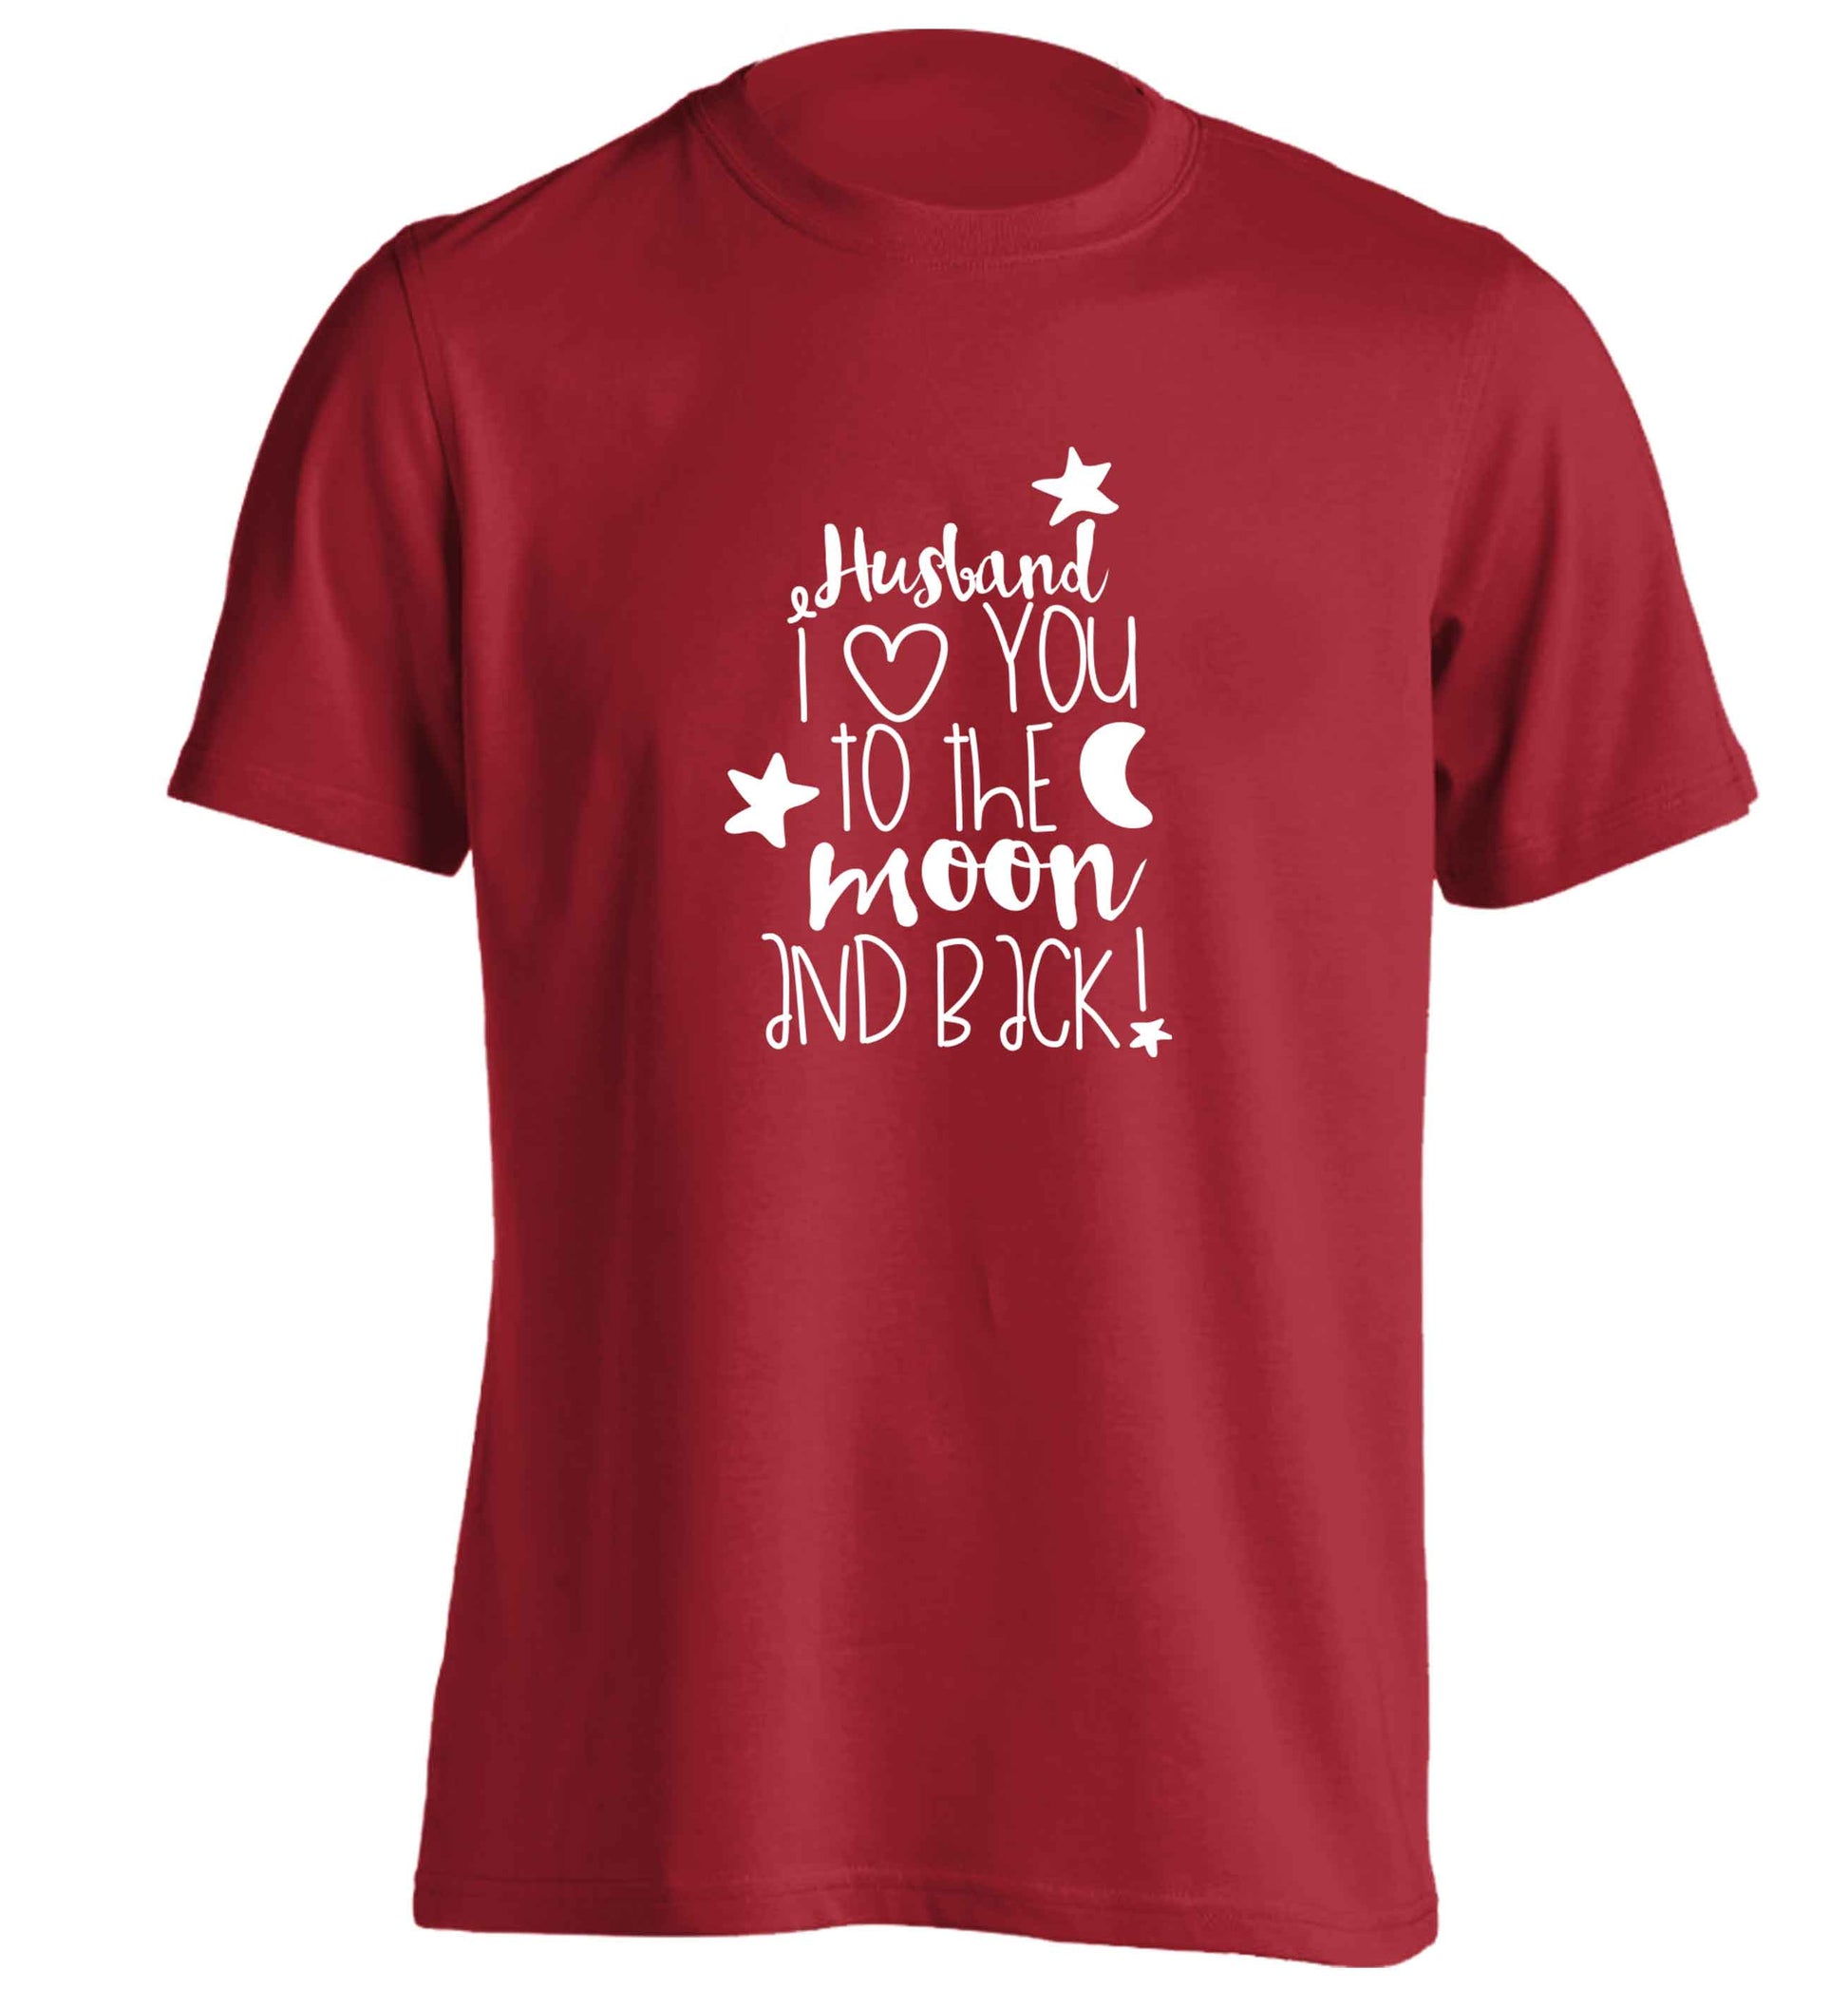 Husband I love you to the moon and back adults unisex red Tshirt 2XL